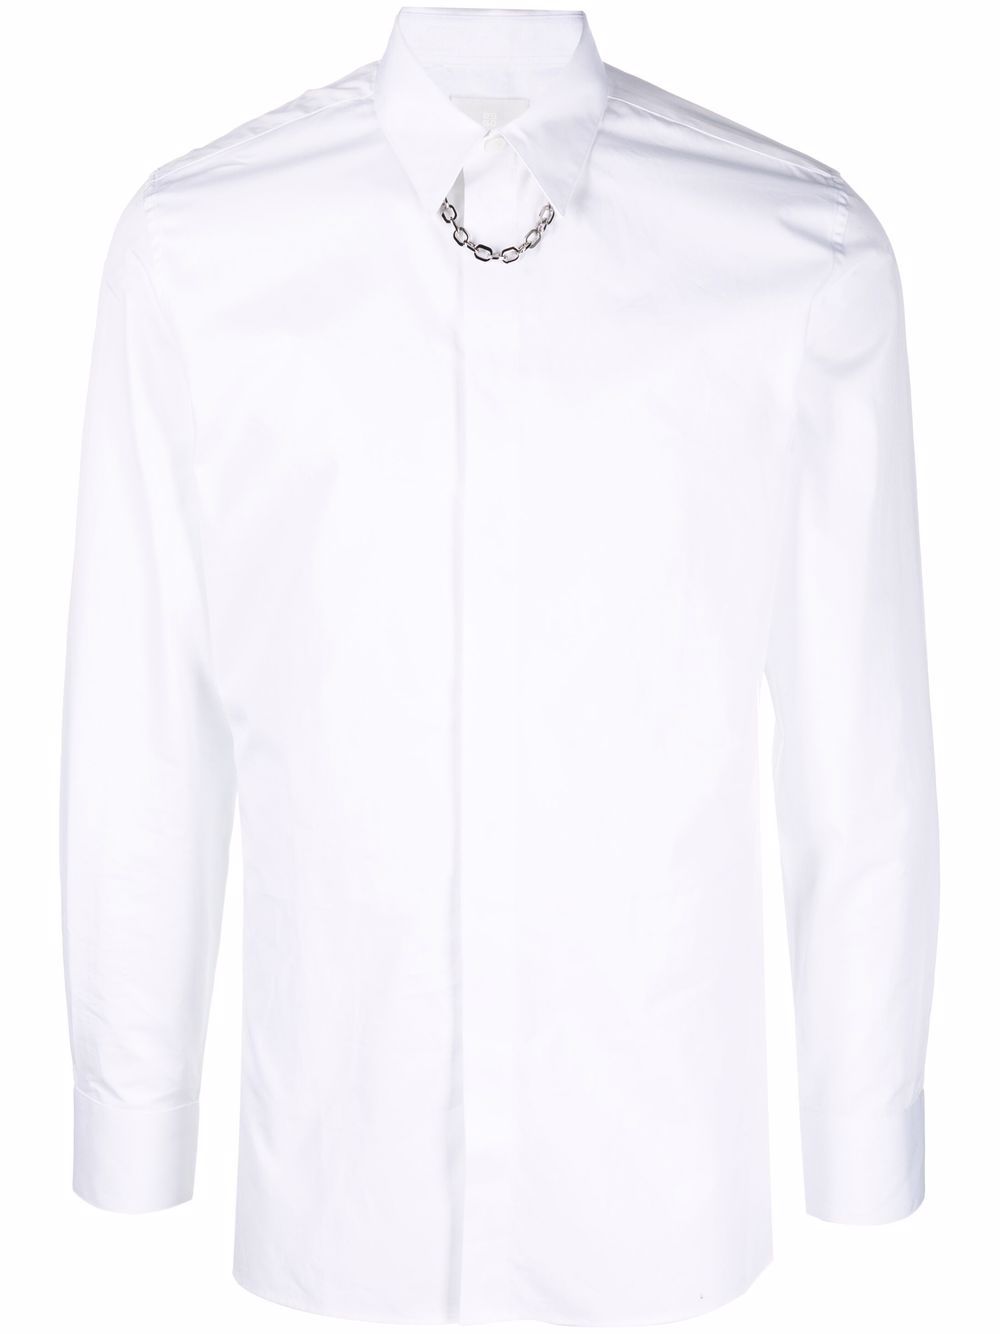 Givenchy chain-link detail shirt - White von Givenchy